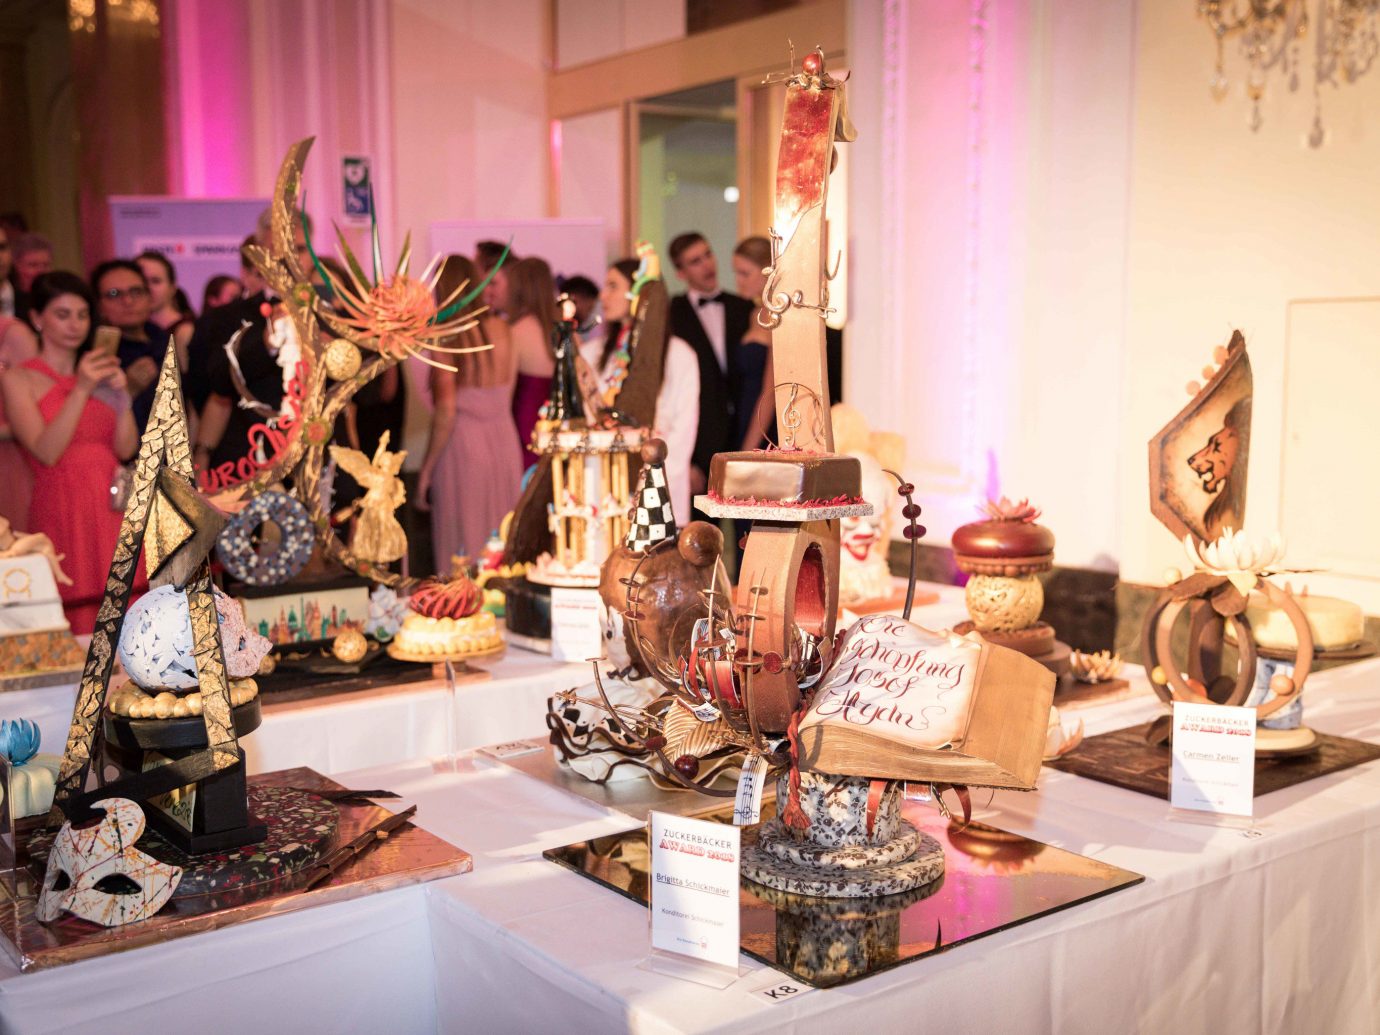 Sweets and a cake at Confectioners' Ball